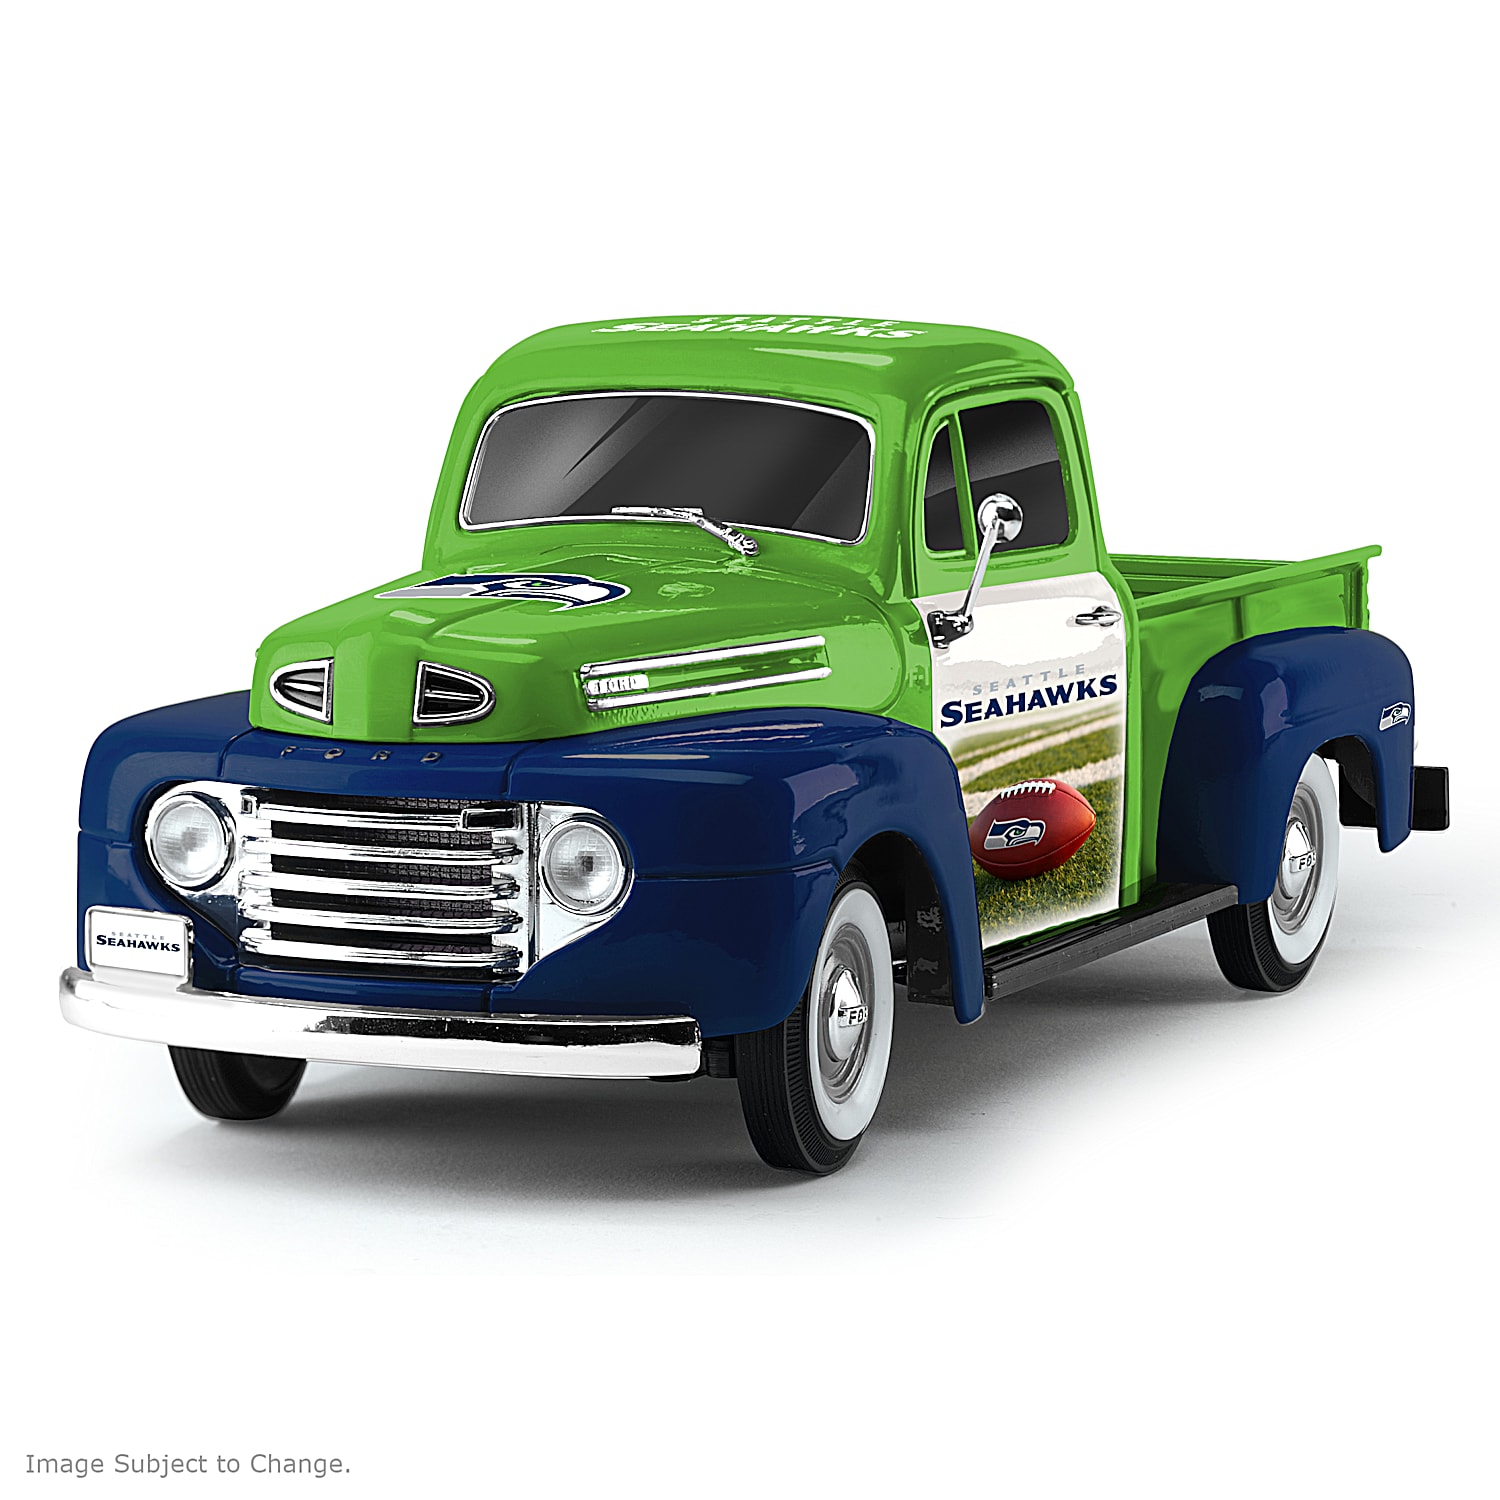 Seattle Seahawks 1:18-Scale 1948 Ford NFL Pickup Truck Sculpture With A  Chrome-Look Trim & Truck Bed With The Logo From Seattles Super Bowl Win